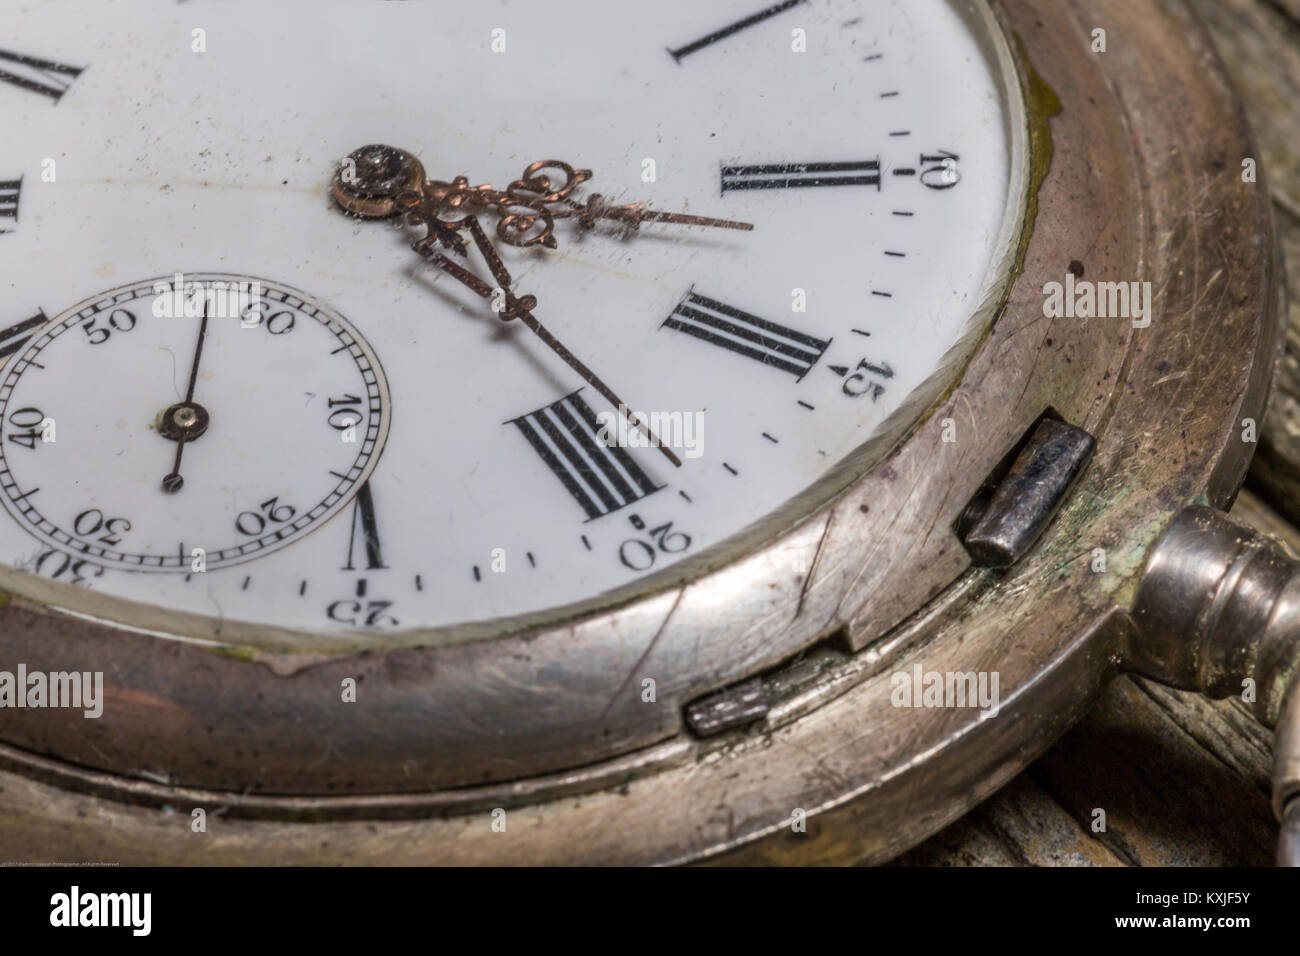 Close-Up image of antique pocket watch on wooden table Stock Photo